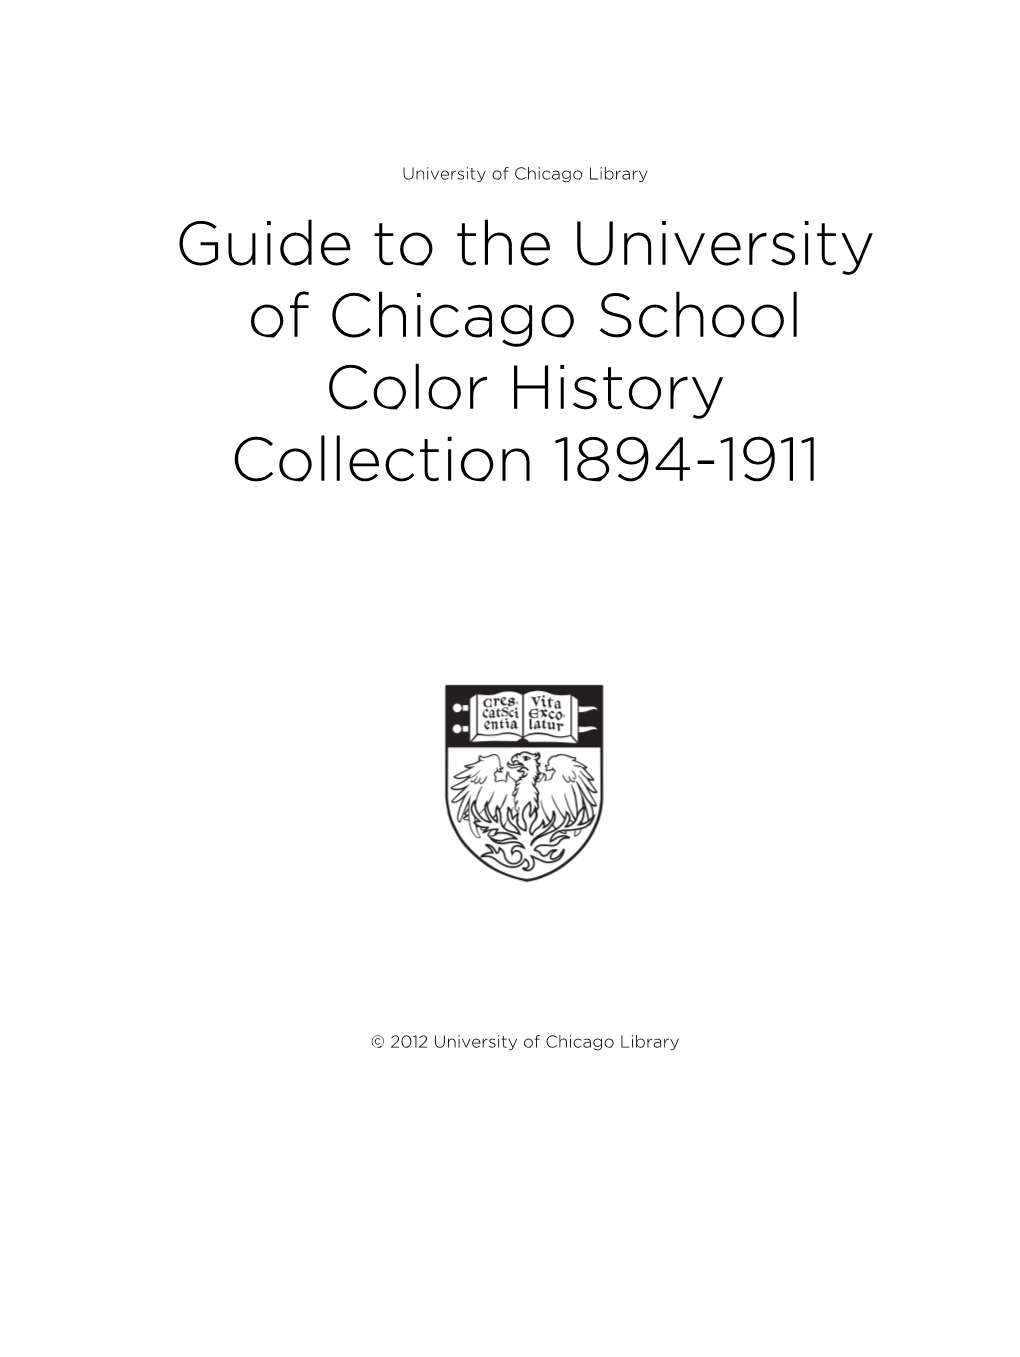 Guide to the University of Chicago School Color History Collection 1894-1911